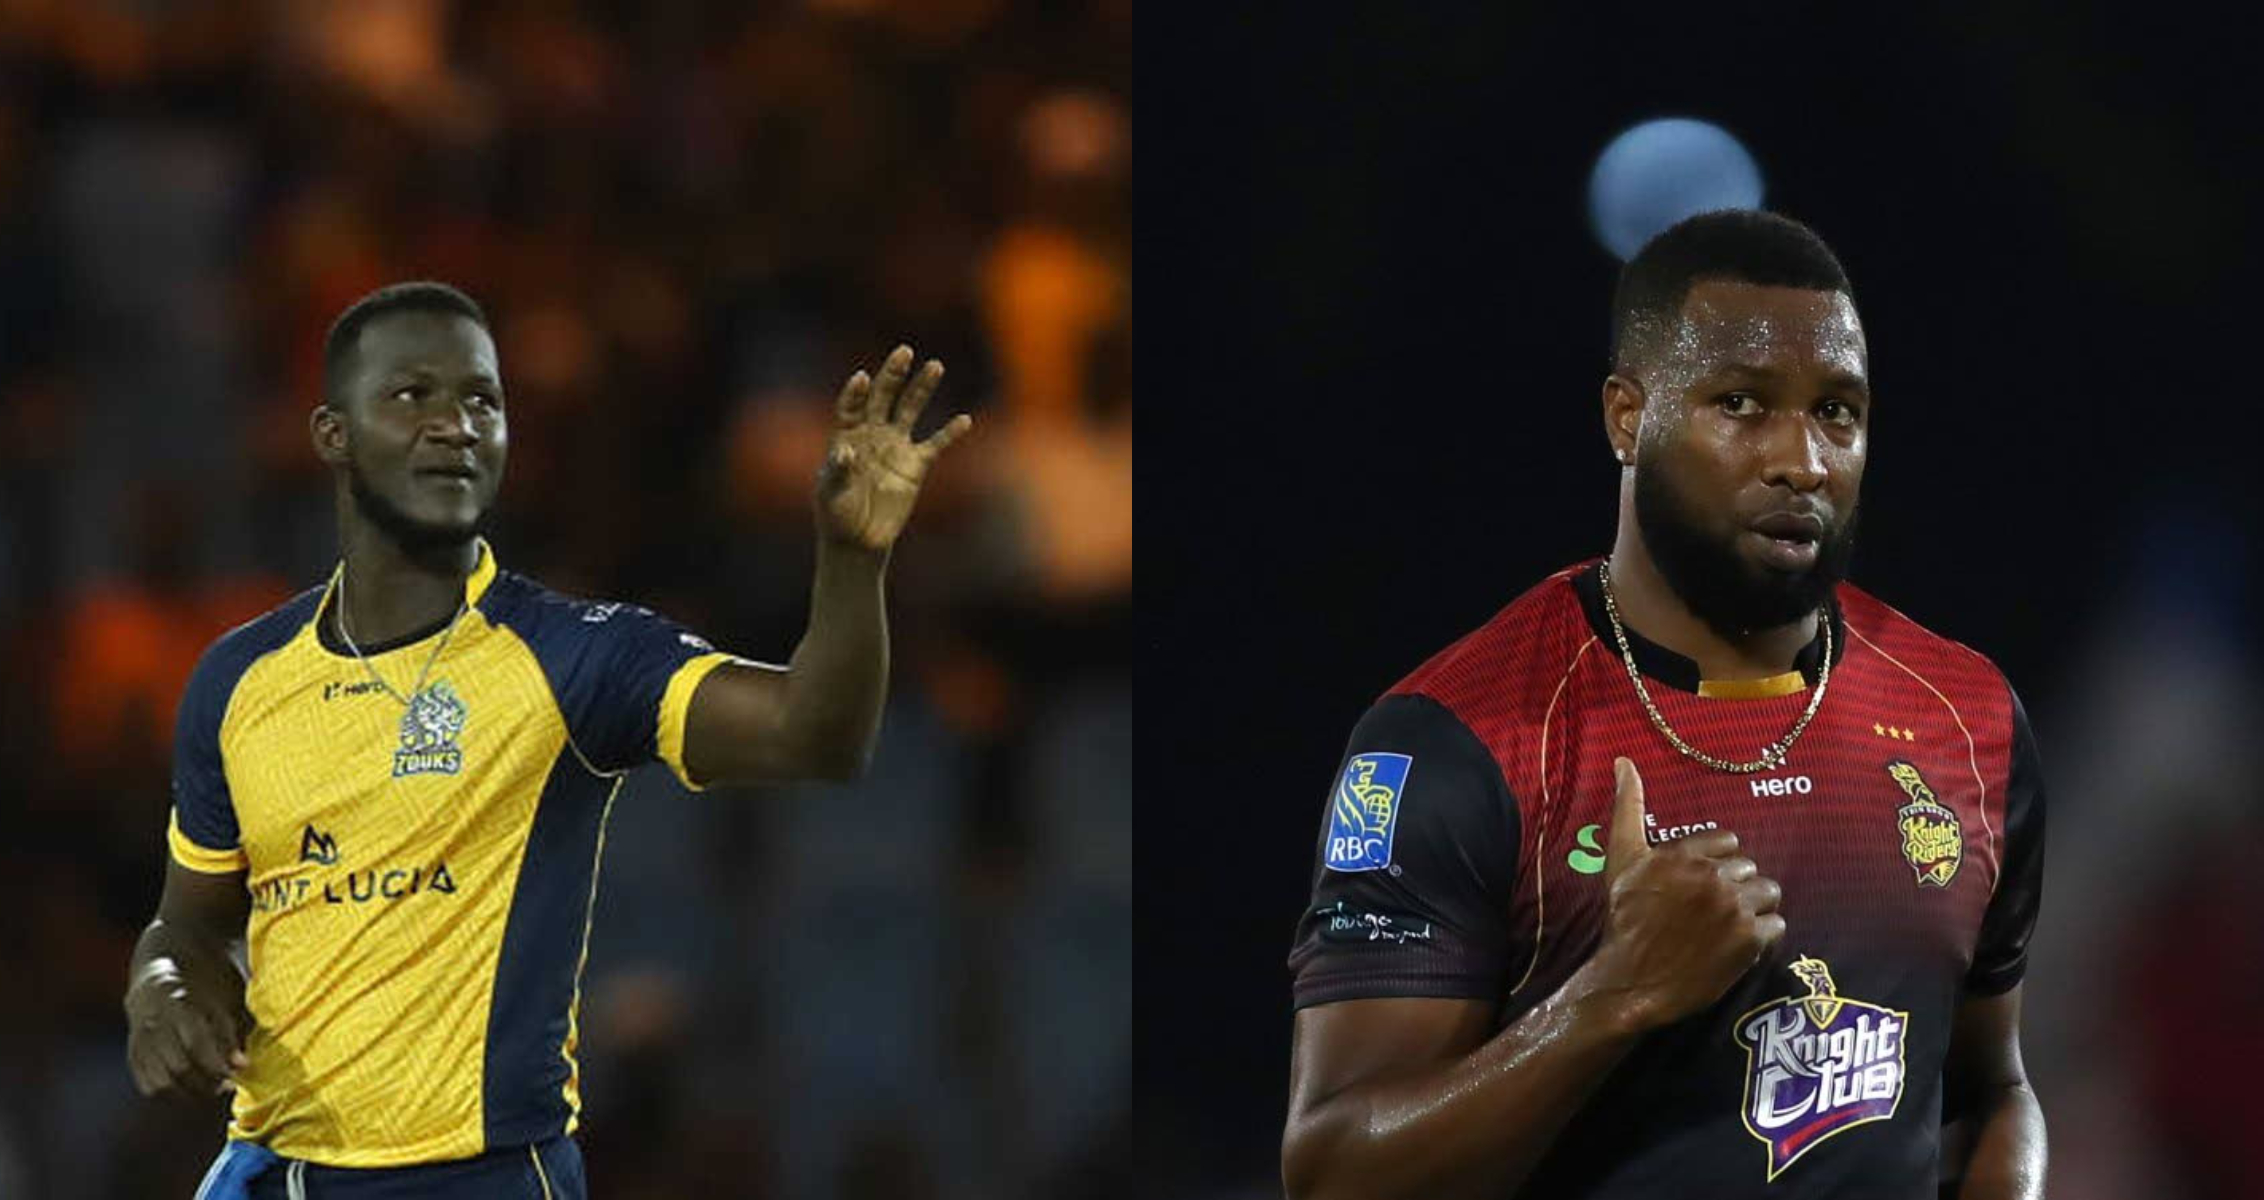 Trinbago Knight Riders and St Lucia Zouks have qualified for the semis